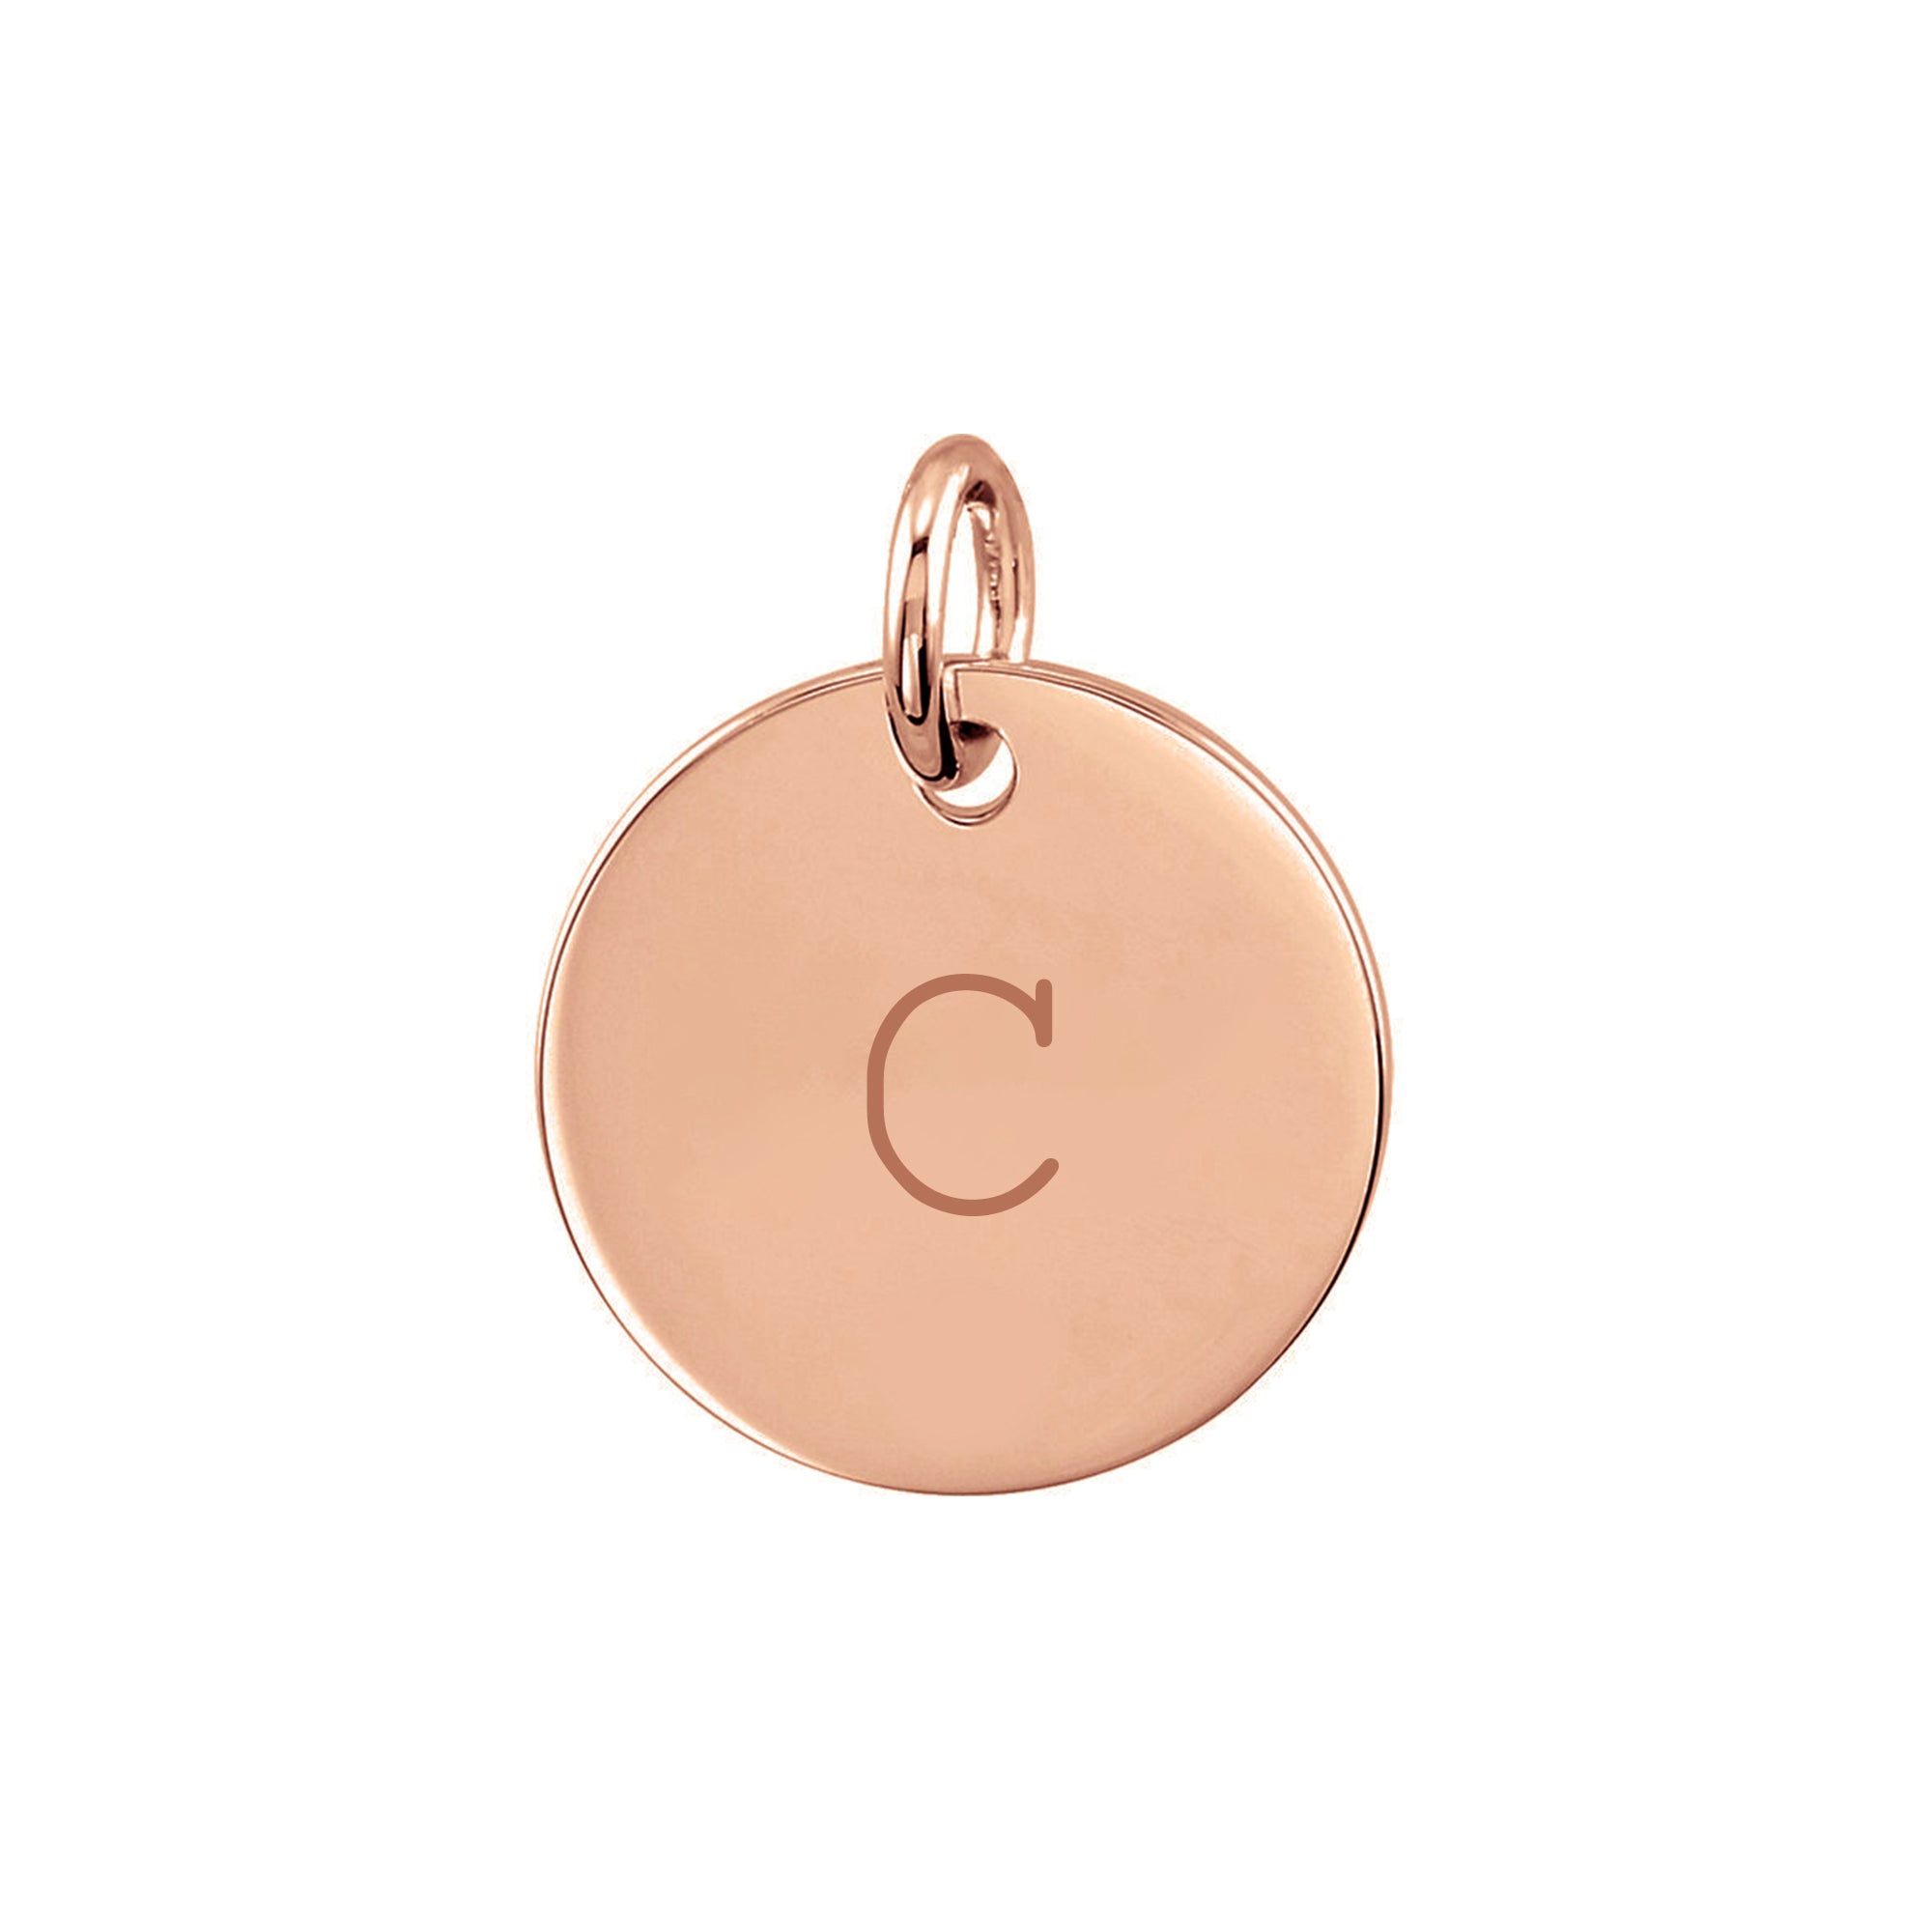 Personalized Initial Disc Pendant